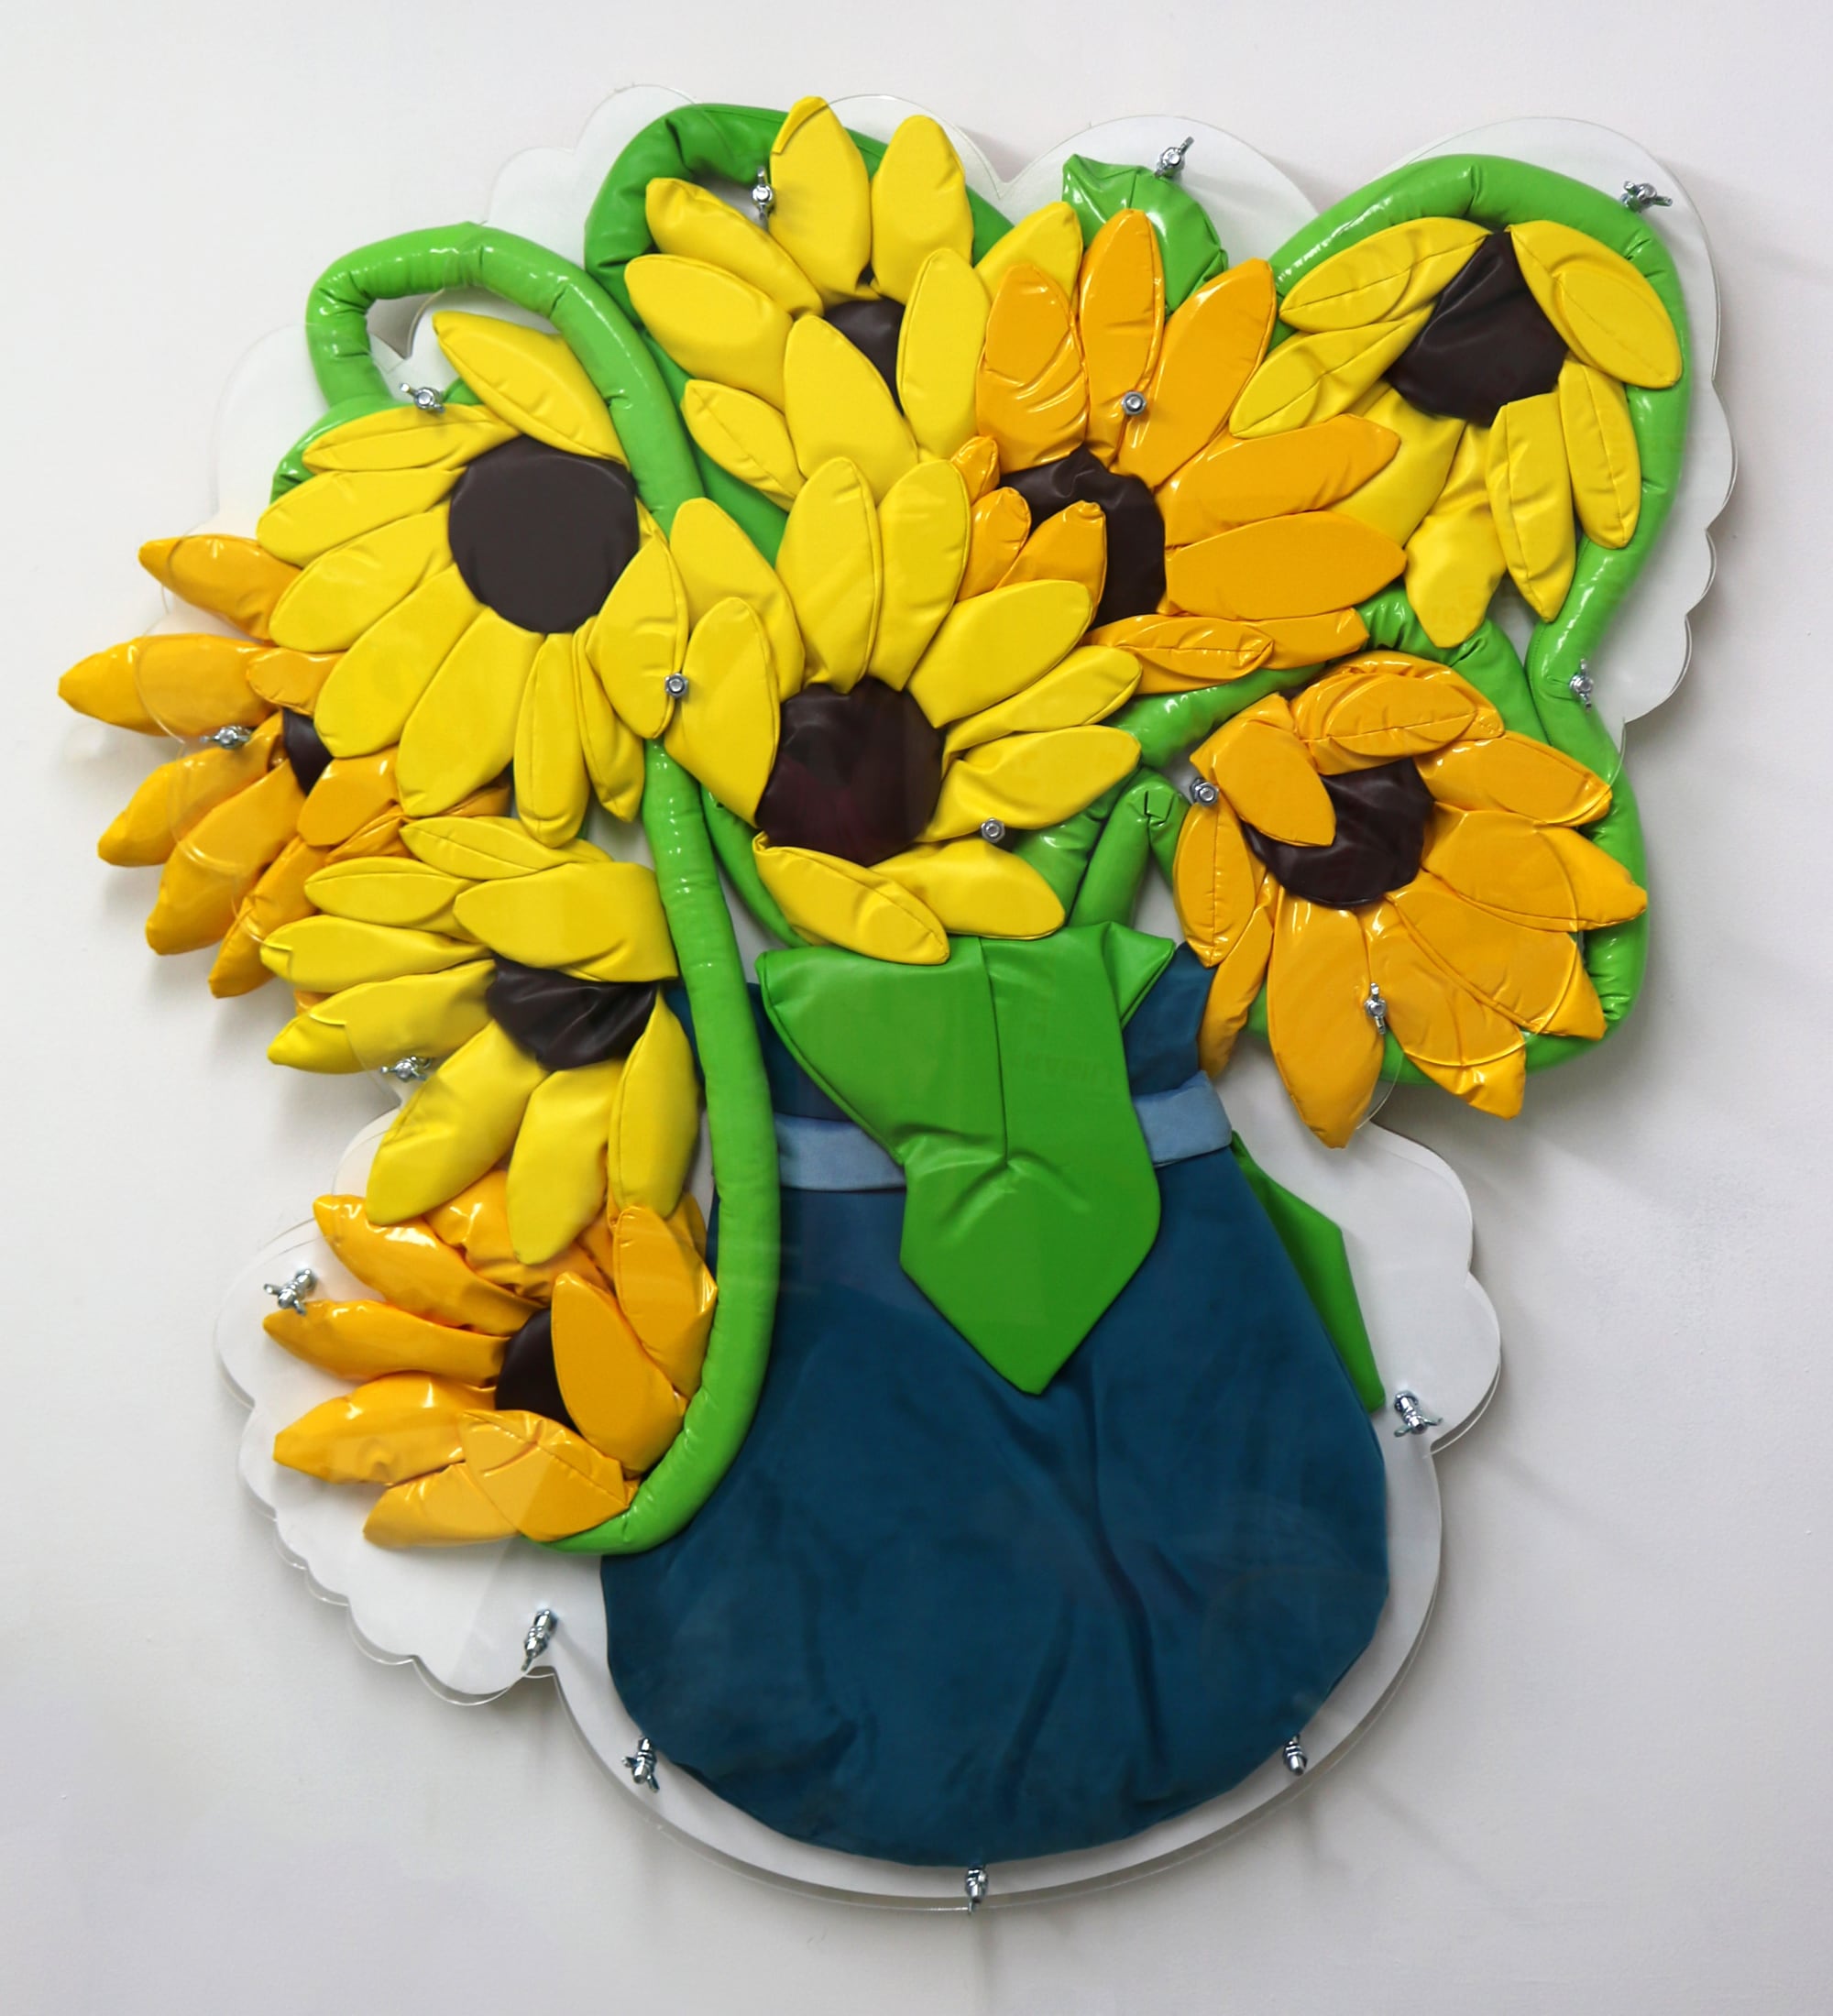 sunflowers are squashed under a clear acrylic panel